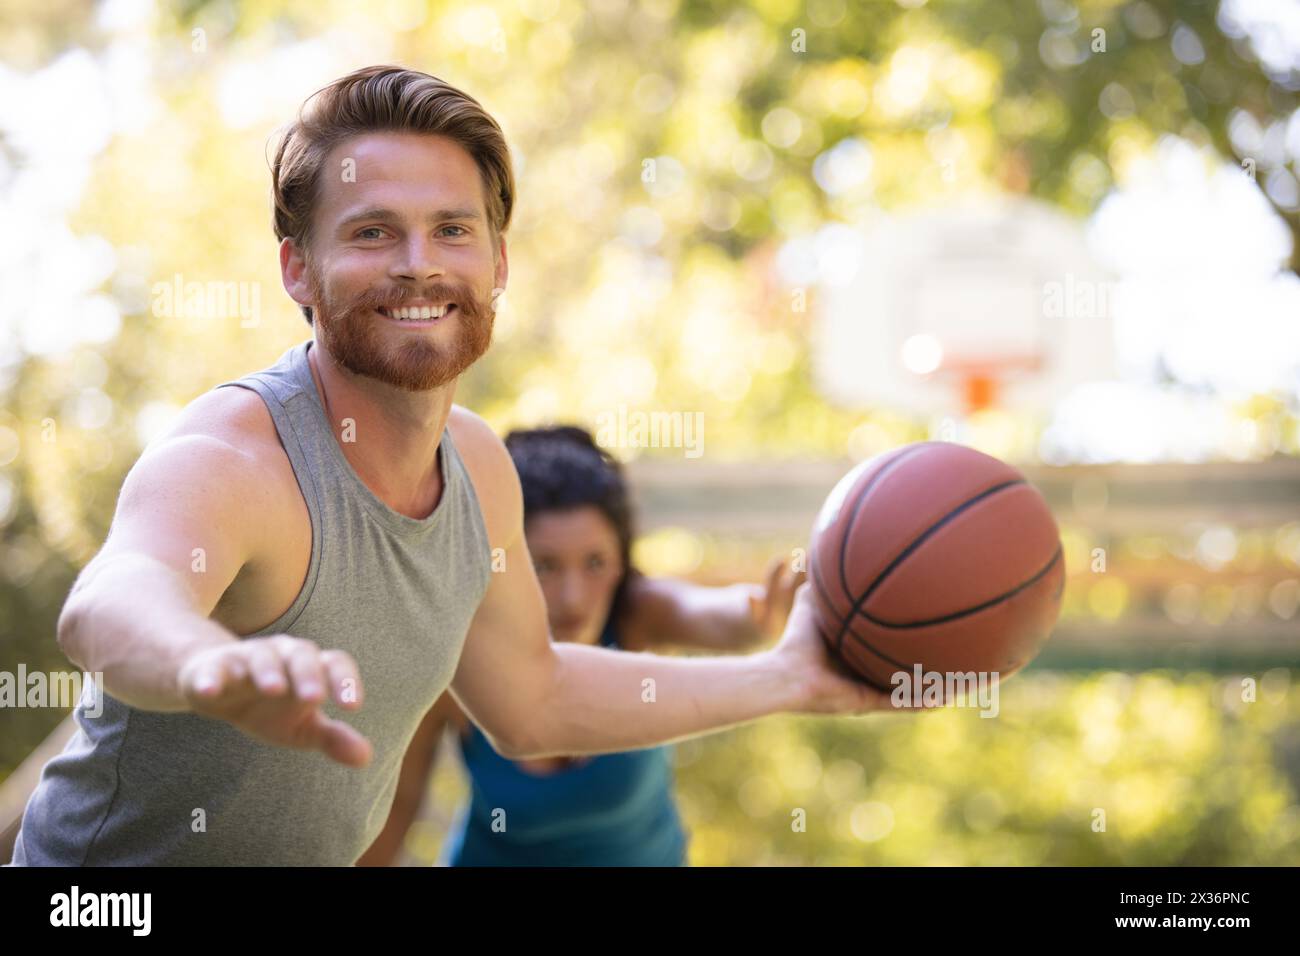 man holding ball during mixed game of basketball Stock Photo